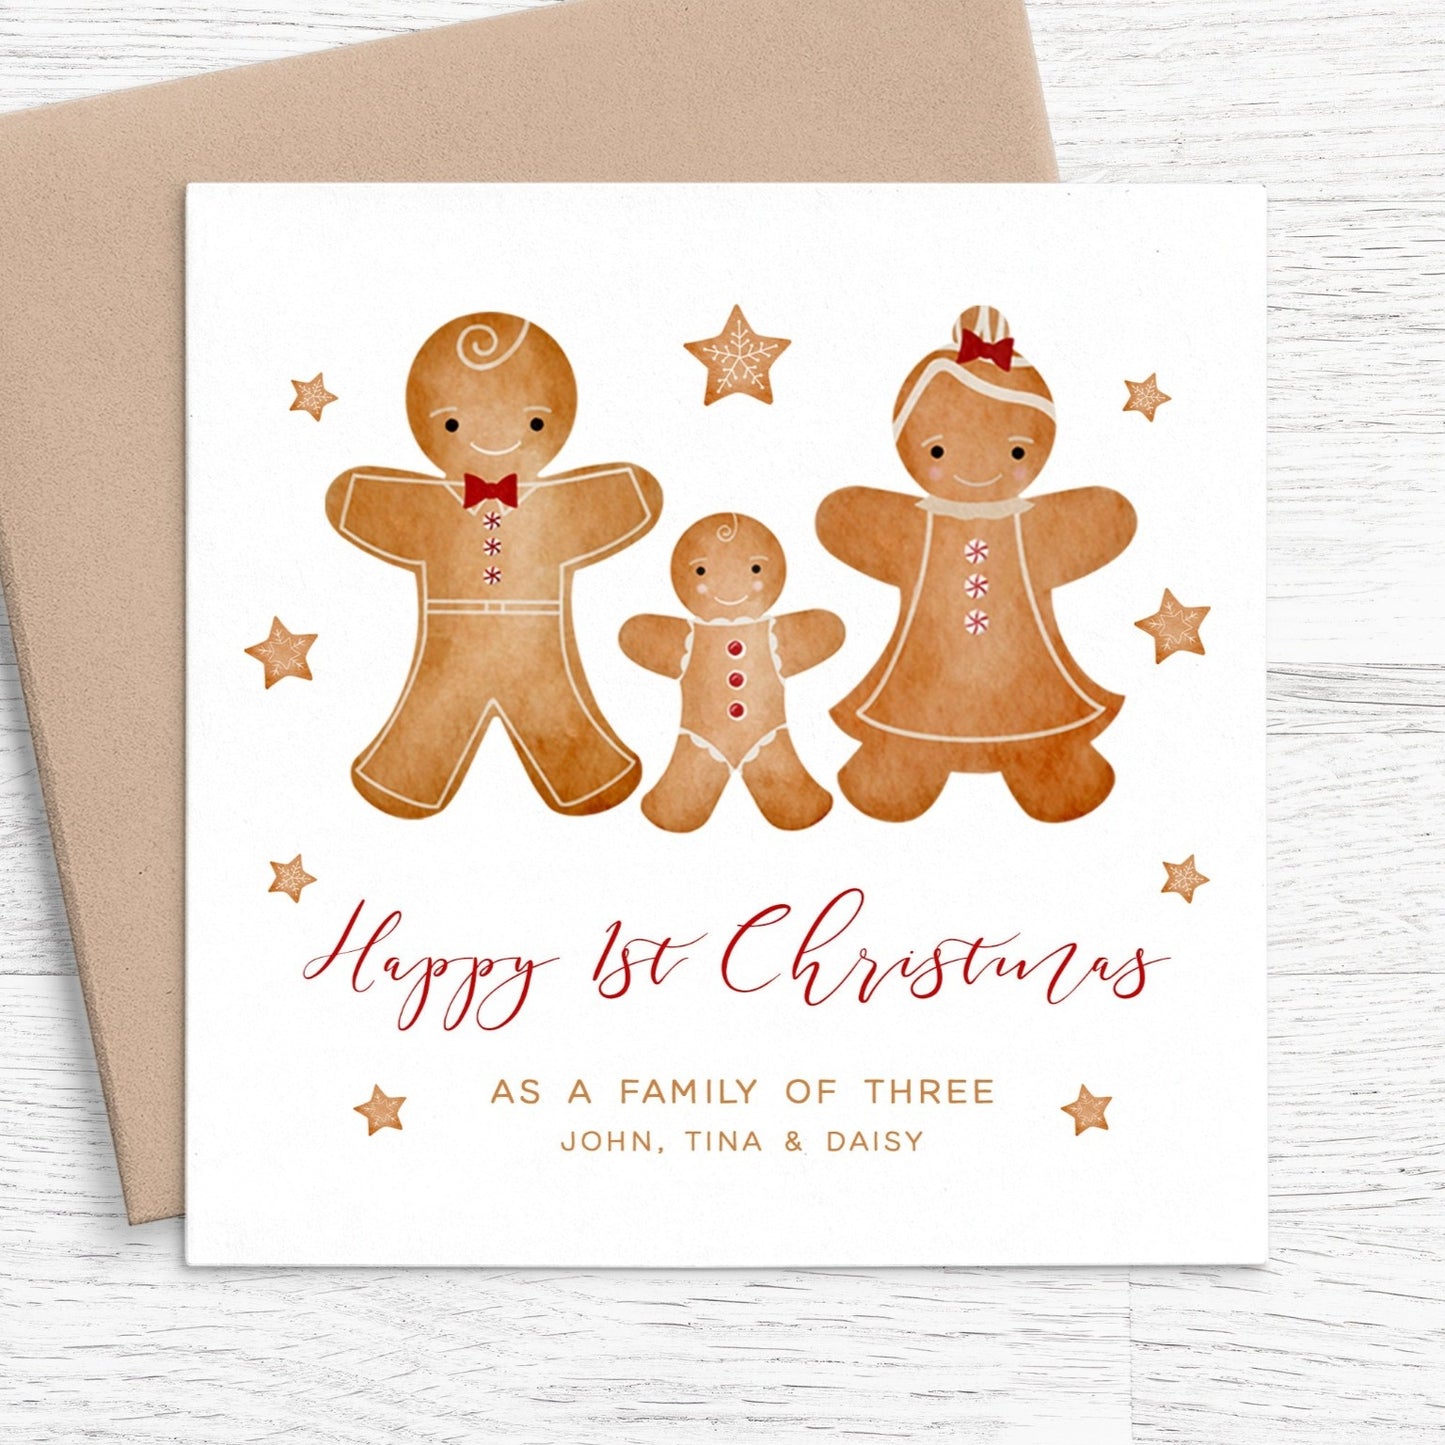 gingerbread happy 1st christmas as a family of three card personalised kraft brown envelope matte white cardstock